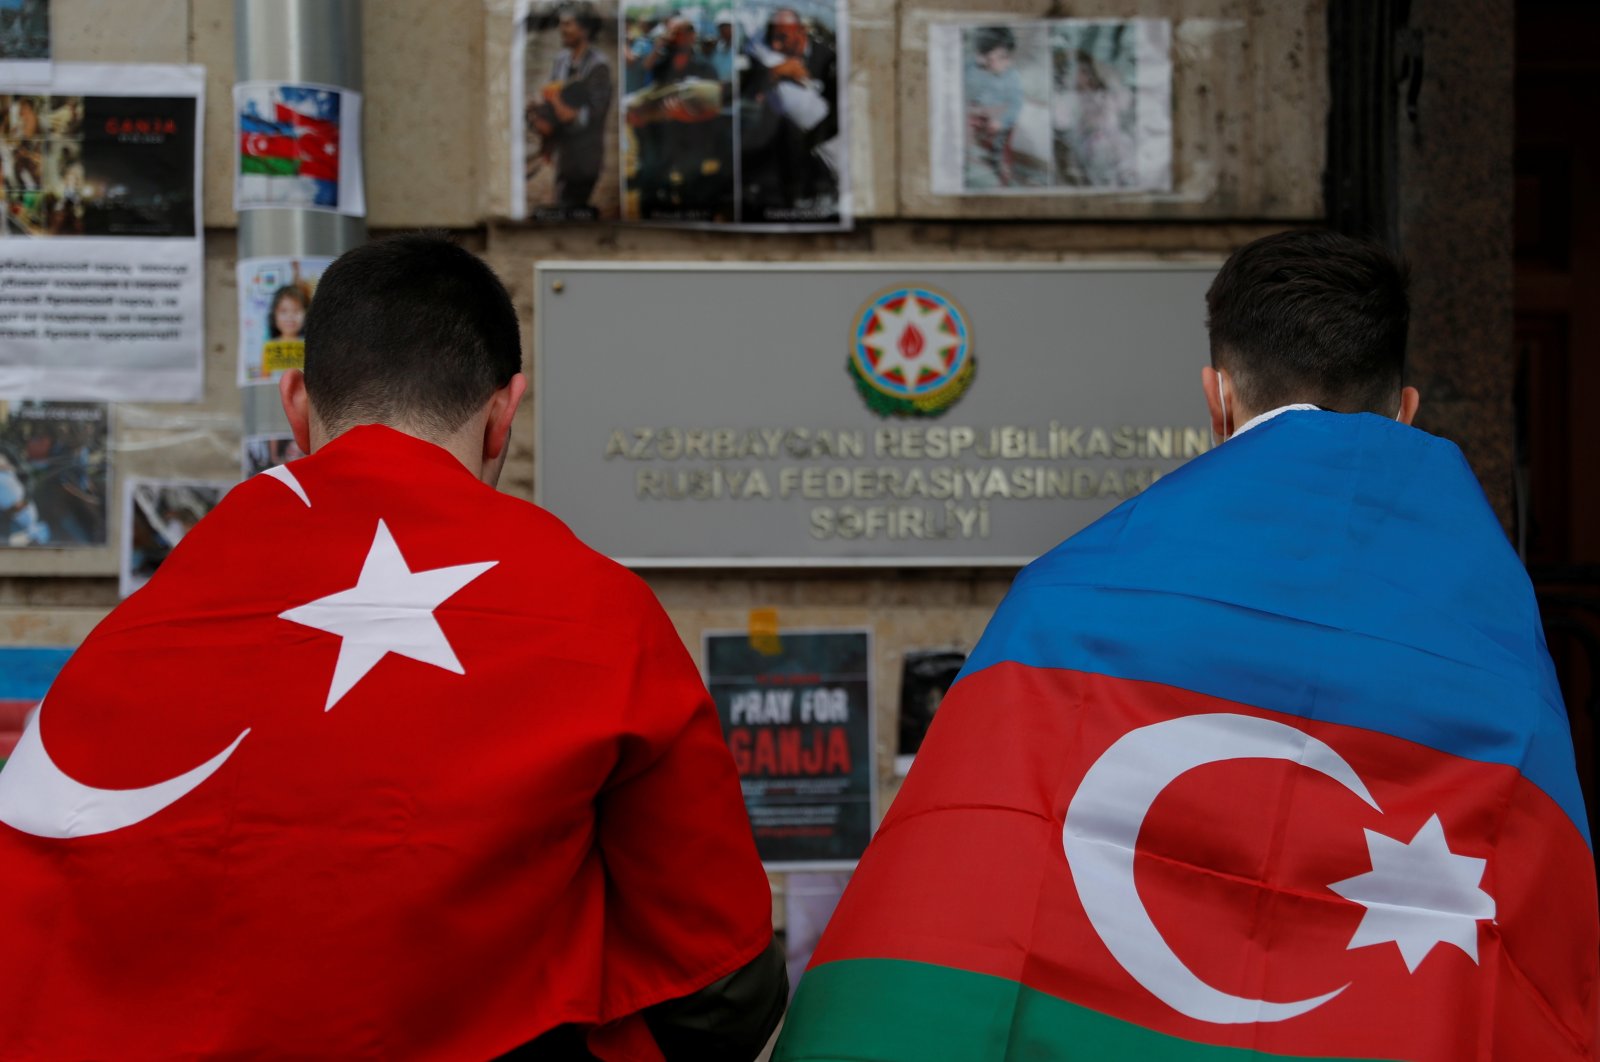 Men holding the national flags of Azerbaijan and Turkey stand next to a makeshift memorial for people killed in Azerbaijan during the military conflict over the region of Nagorno-Karabakh, outside the Azerbaijani Embassy in Moscow, Russia, Oct. 19, 2020. (REUTERS Photo)